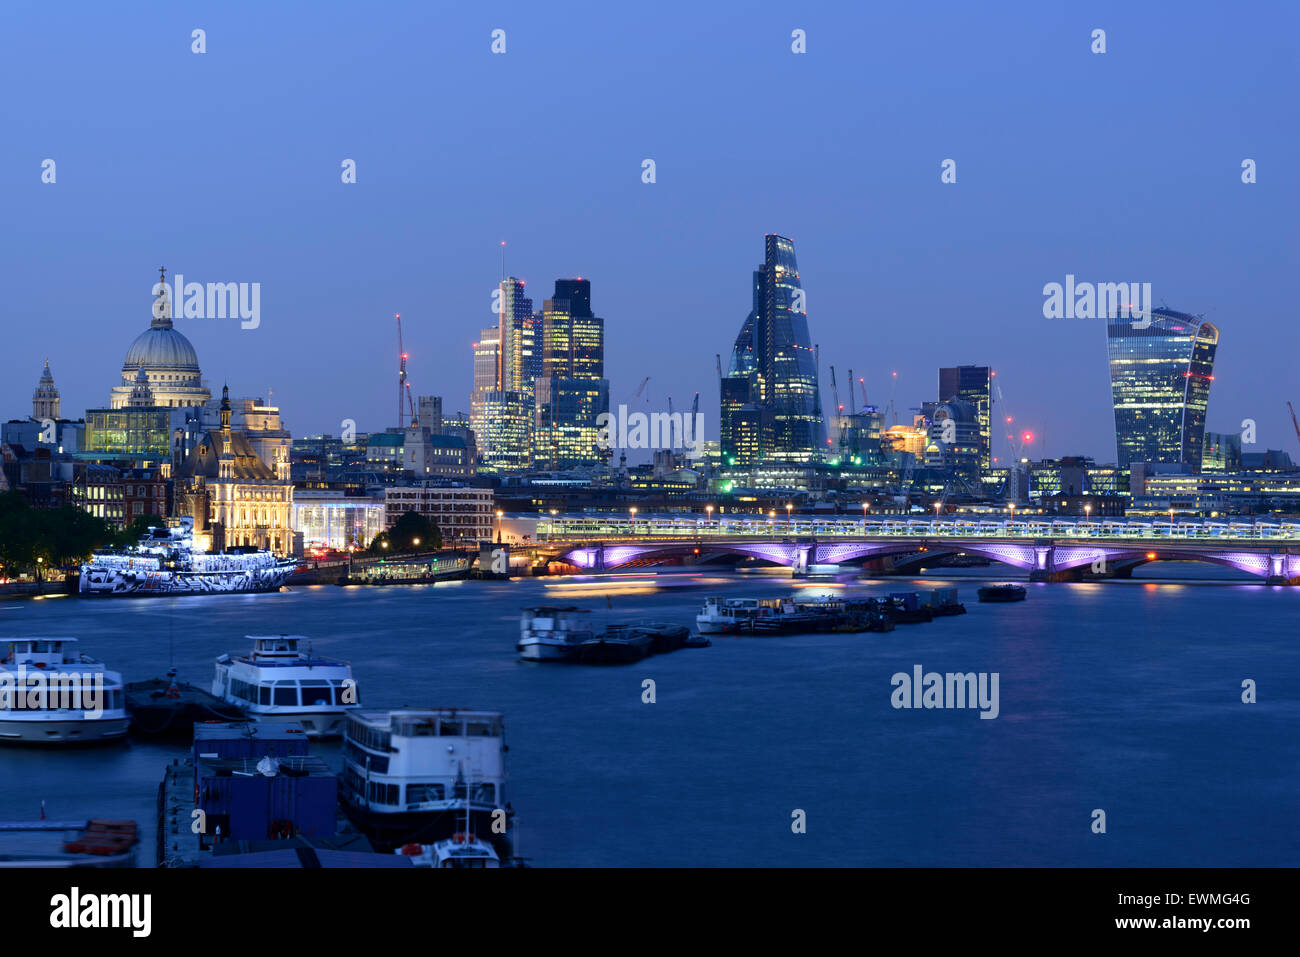 City centre with St. Paul's Cathedral and modern skyscrapers, Thames, London, England, United Kingdom Stock Photo